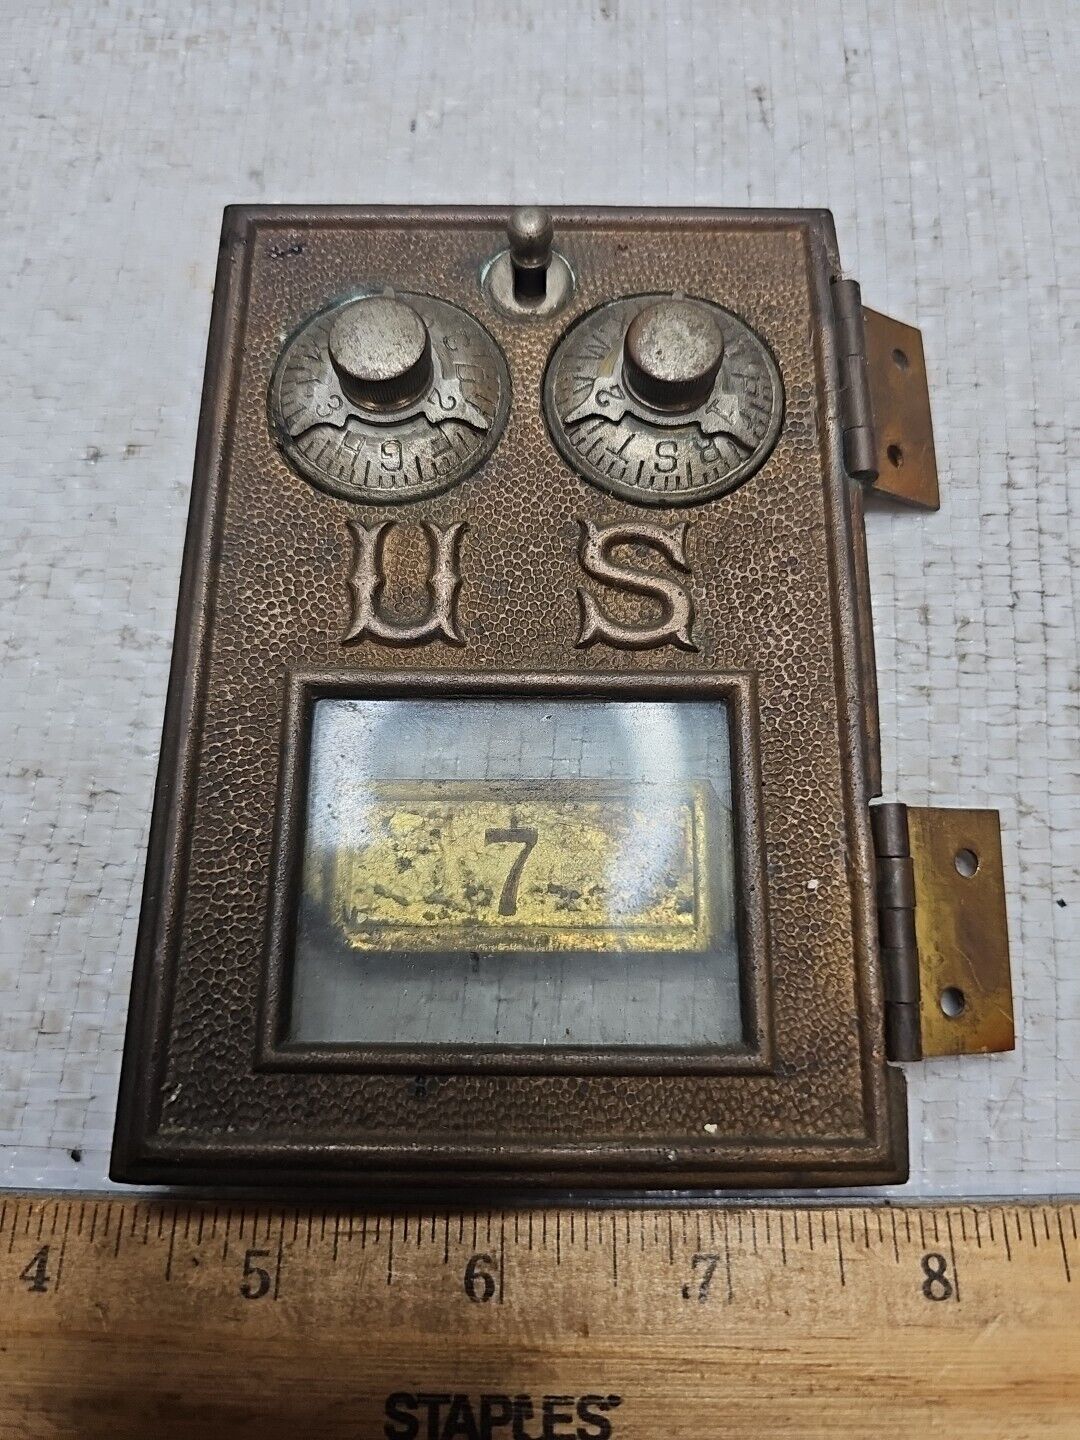 1885 Indianapolis Lock Co Post Office Door 2 Dial w/3 Pointers 1885 Works GREAT